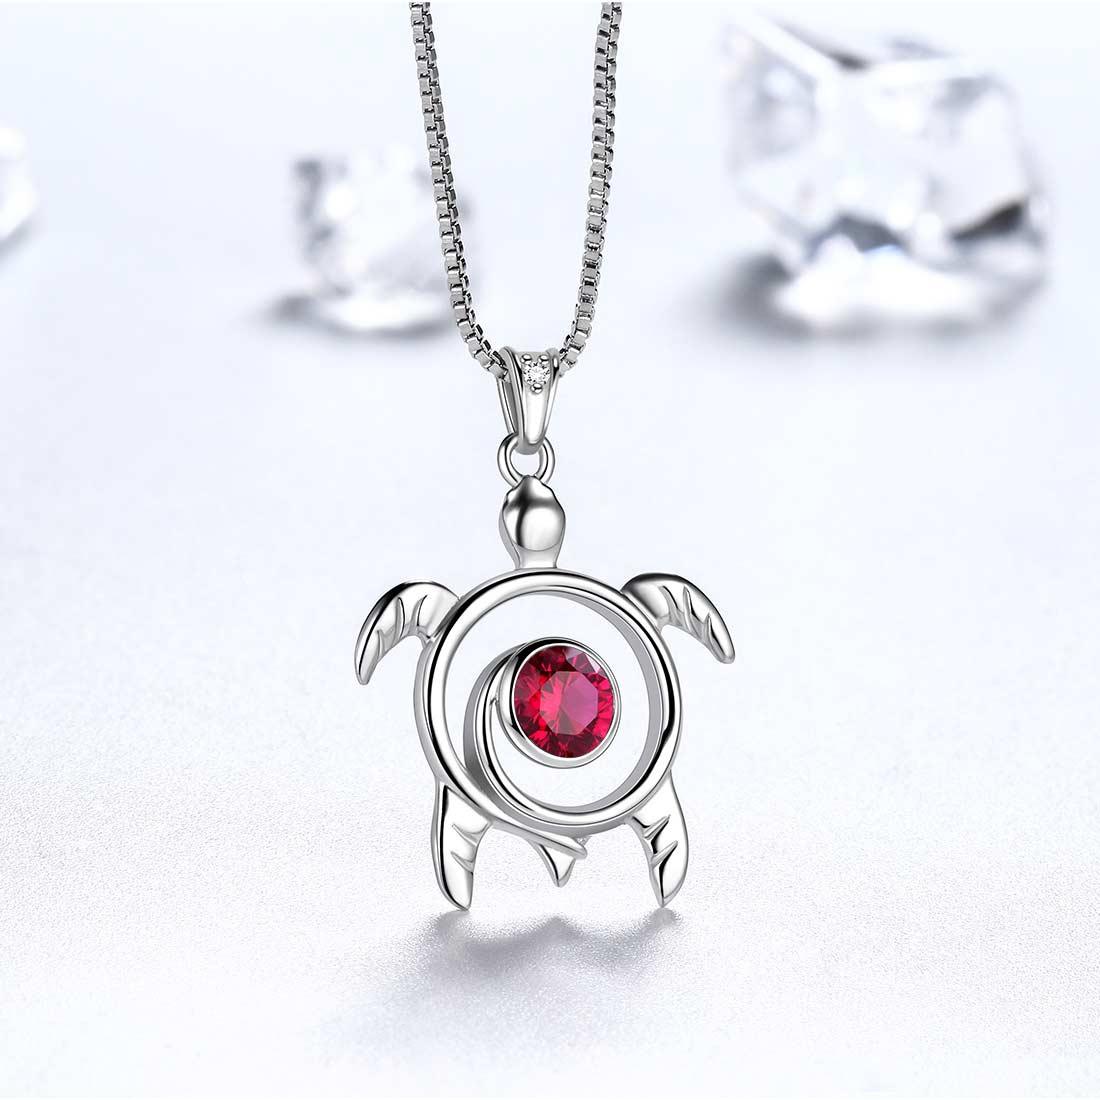 Turtle Birthstone July Ruby Necklace Pendant - Necklaces - Aurora Tears